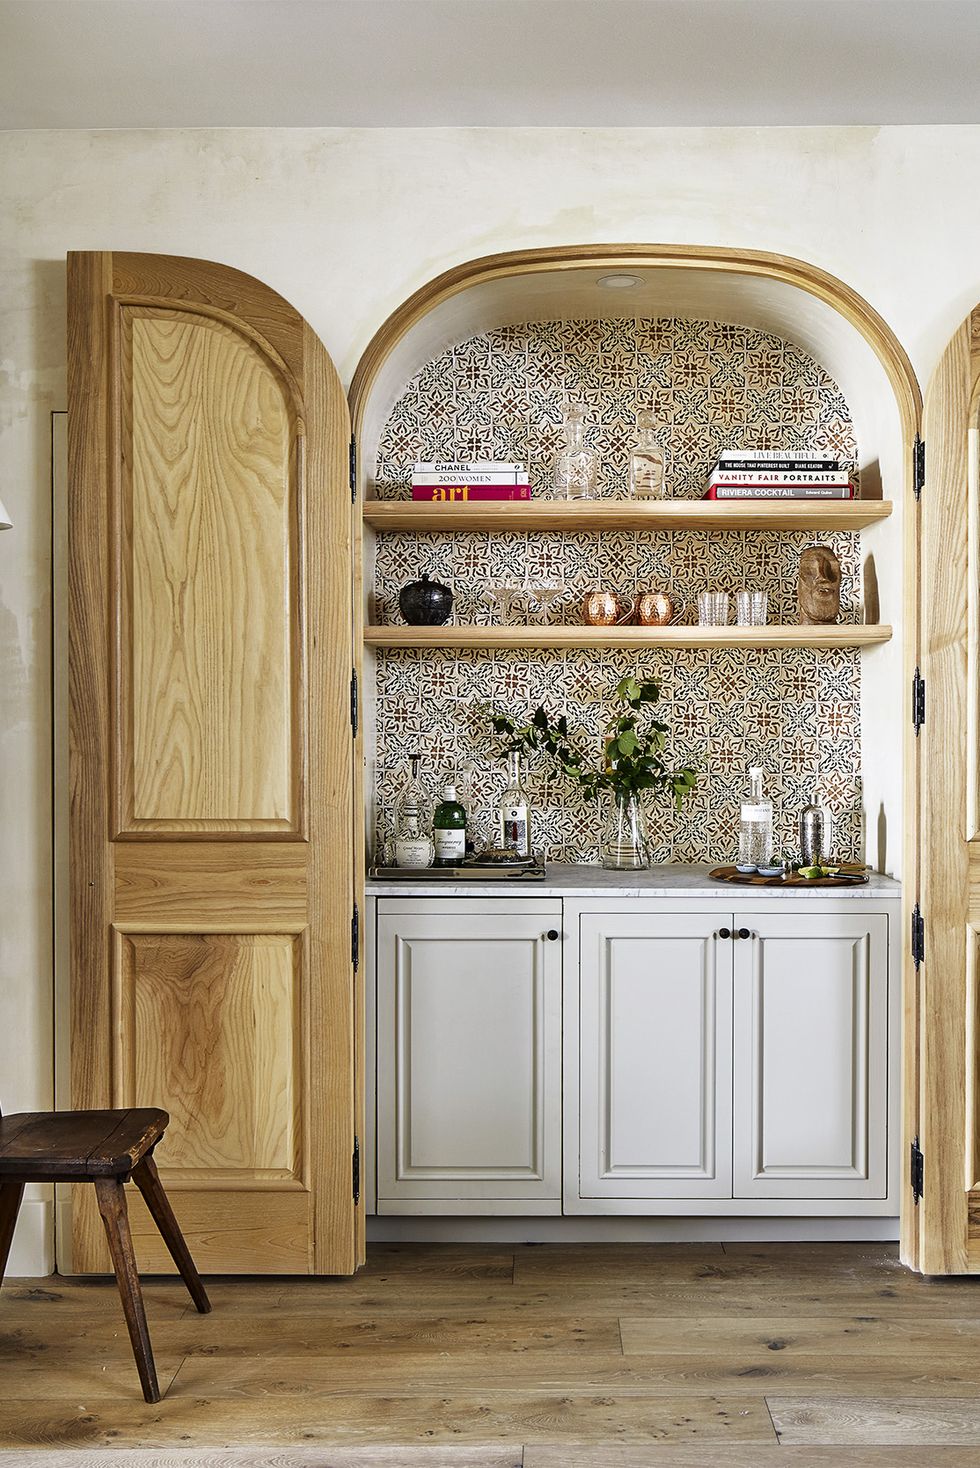 24 Simple and Stylish Home Bar Ideas on a Budget